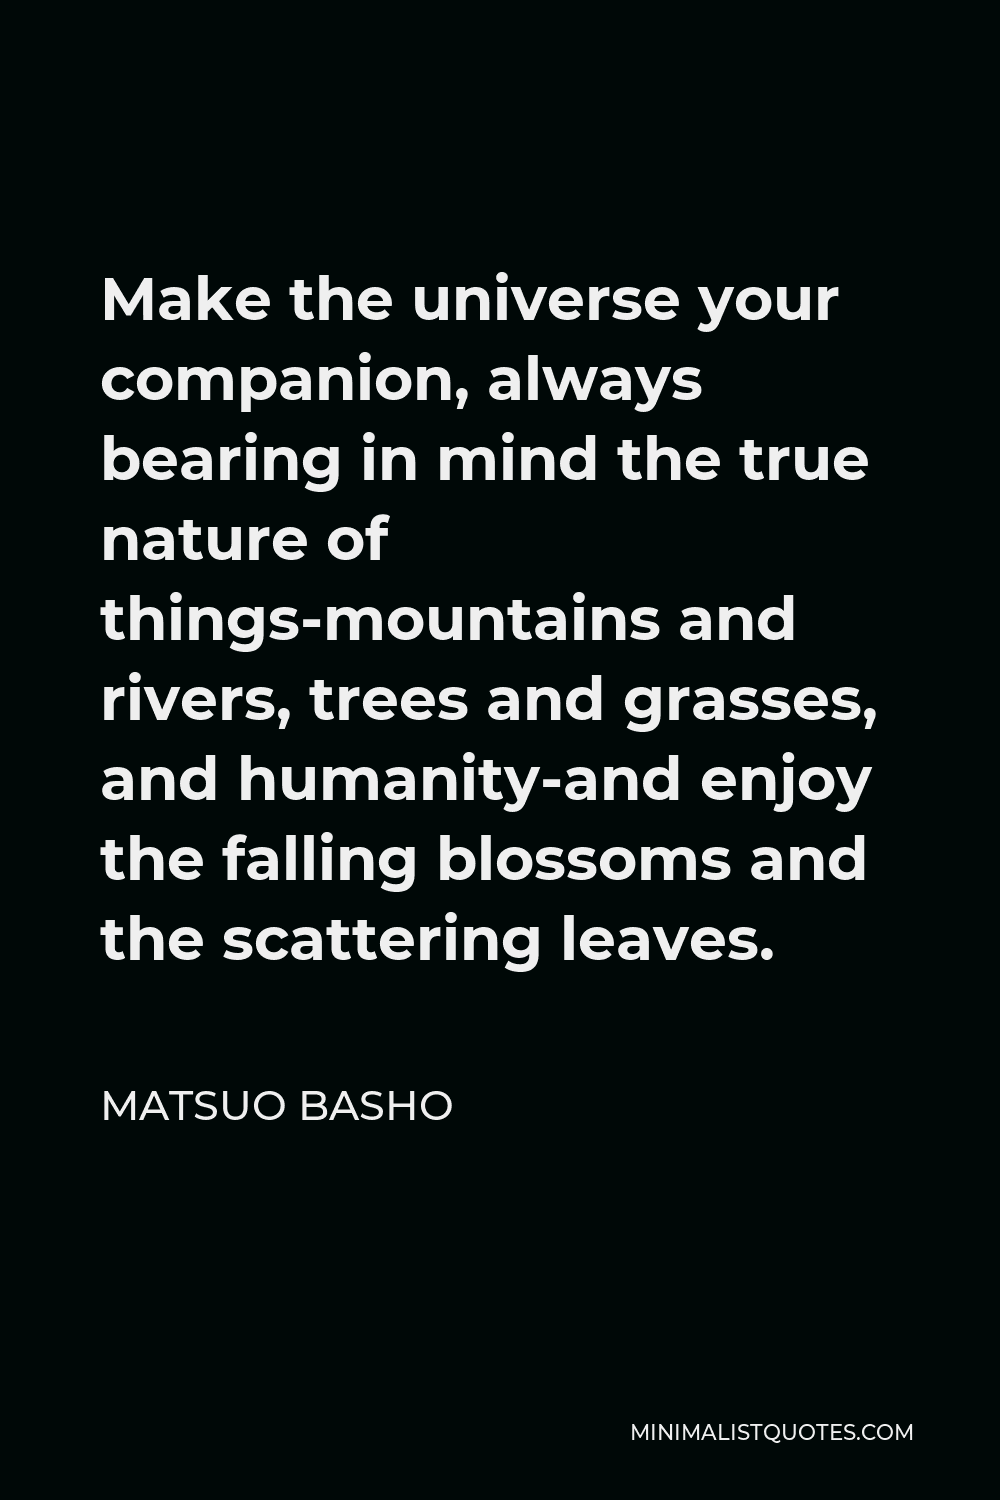 Matsuo Basho Quote - Make the universe your companion, always bearing in mind the true nature of things-mountains and rivers, trees and grasses, and humanity-and enjoy the falling blossoms and the scattering leaves.